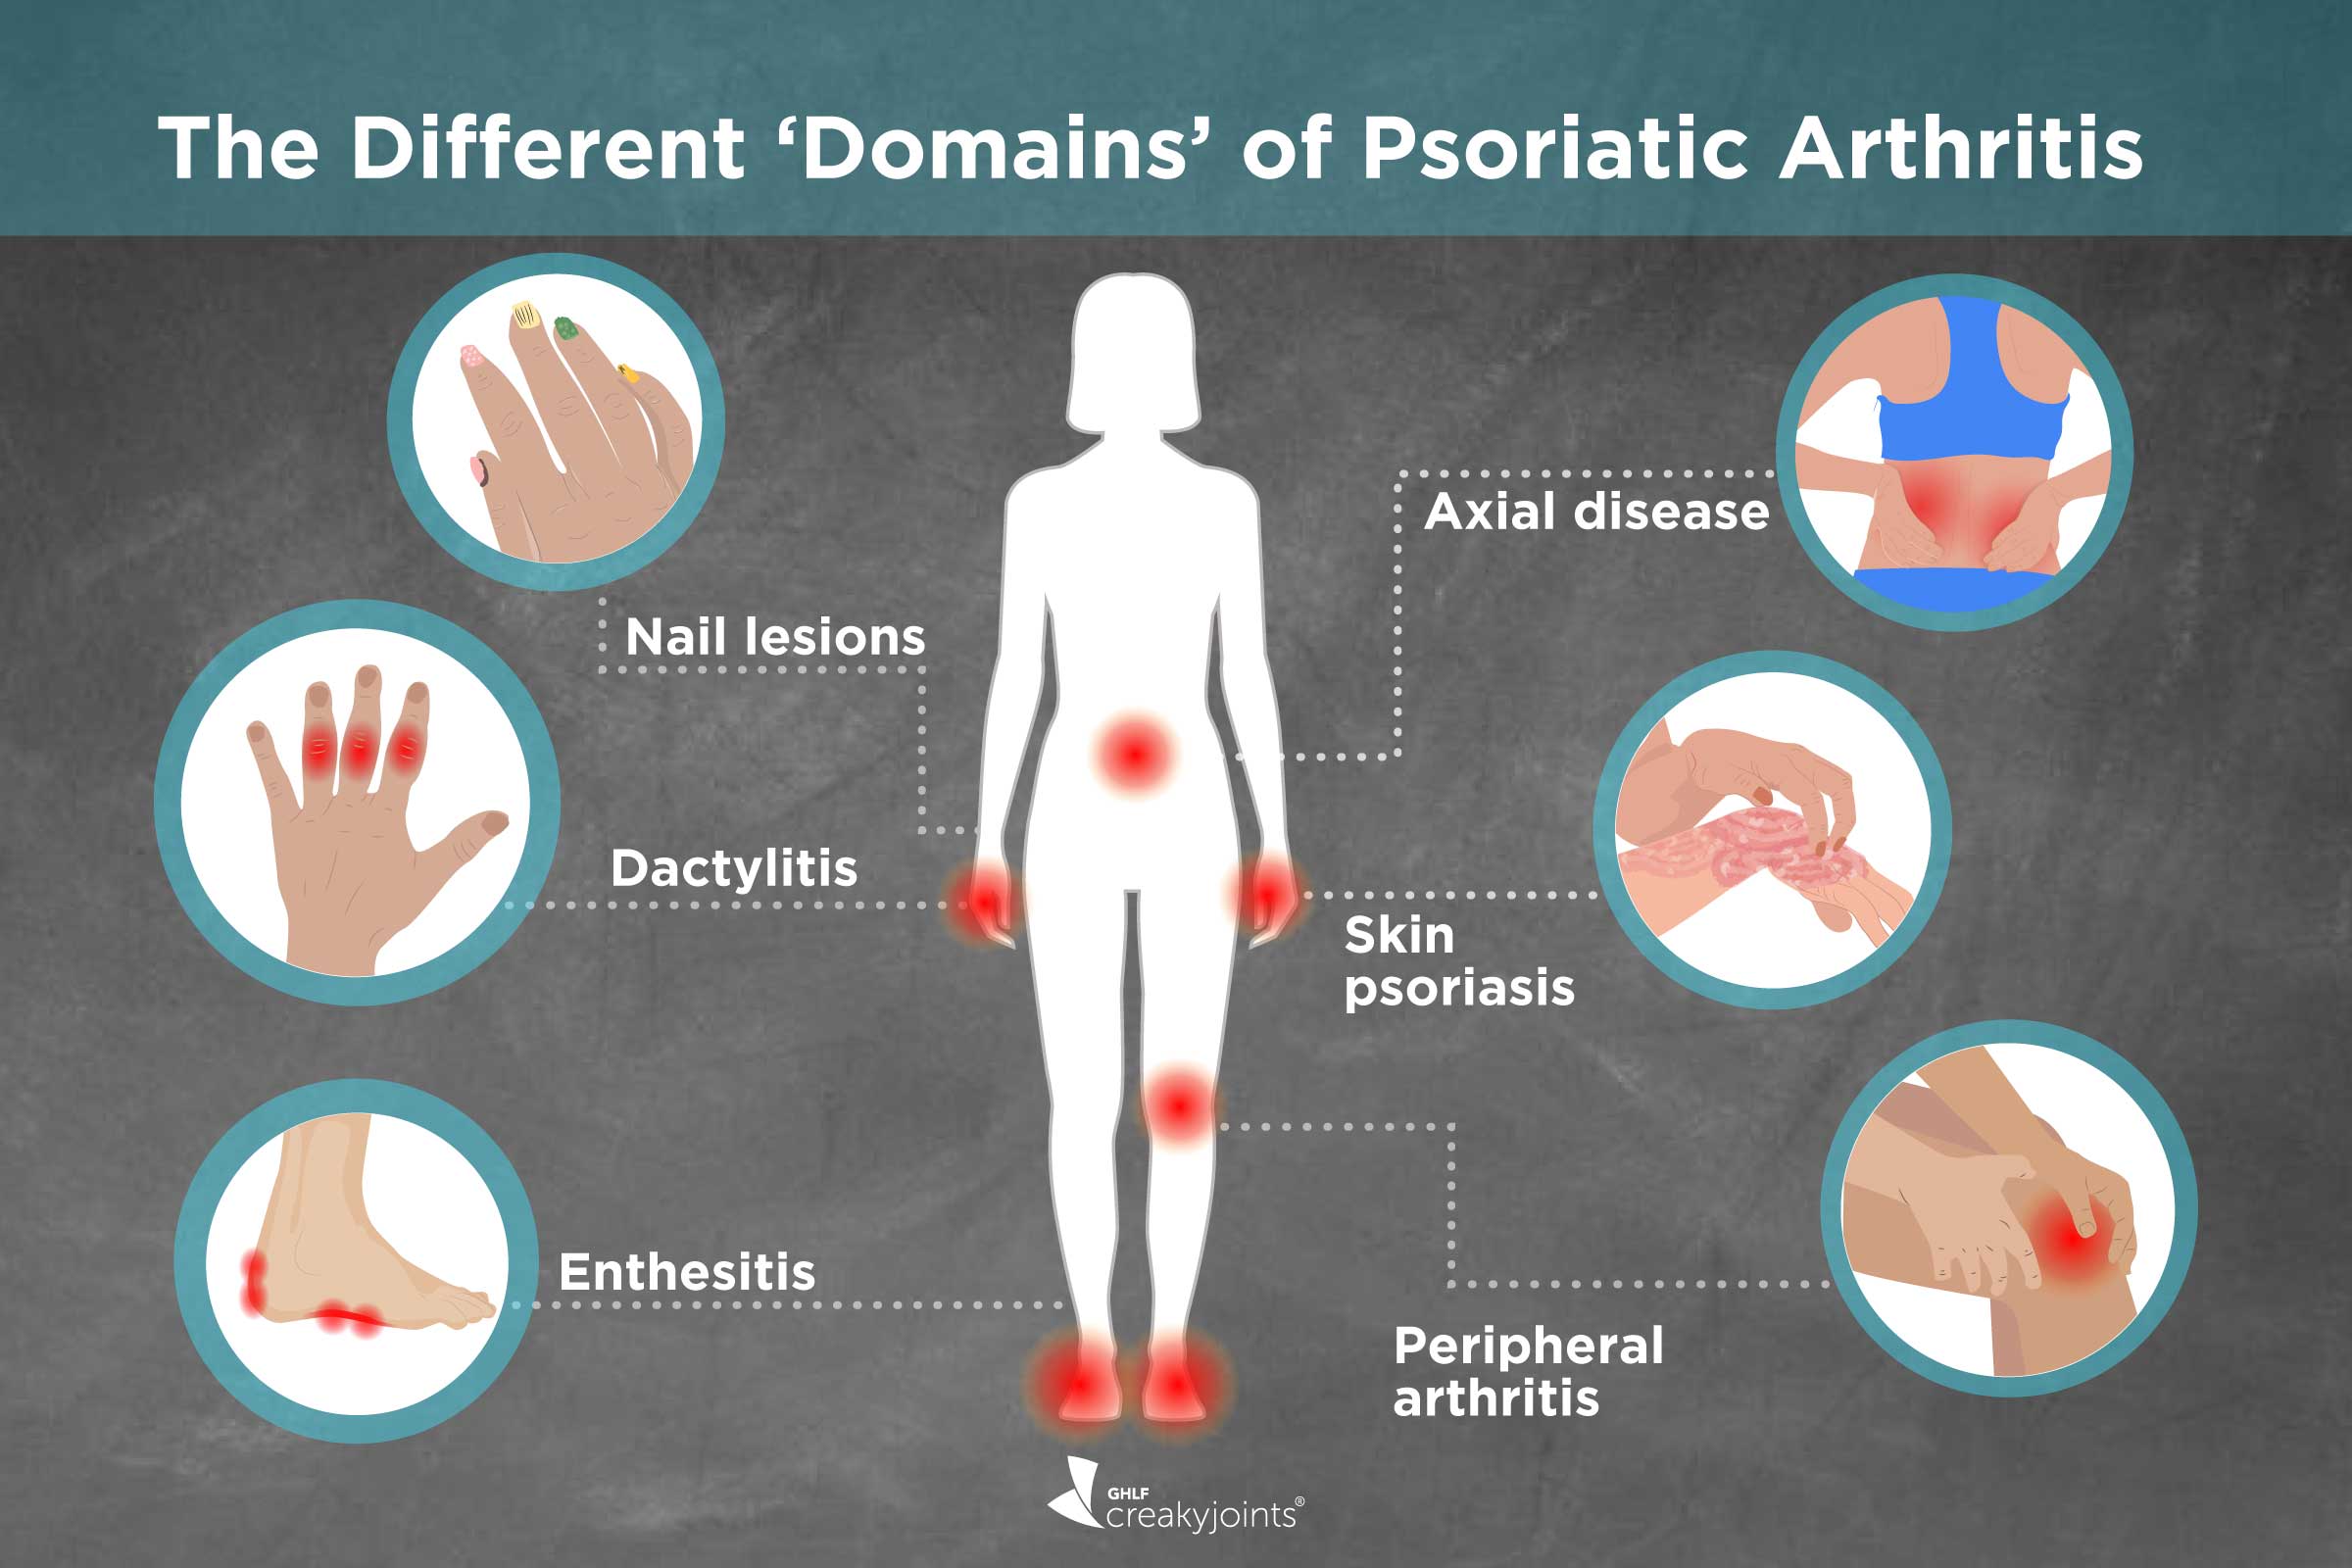 Types and Domains of Psoriatic Arthritis